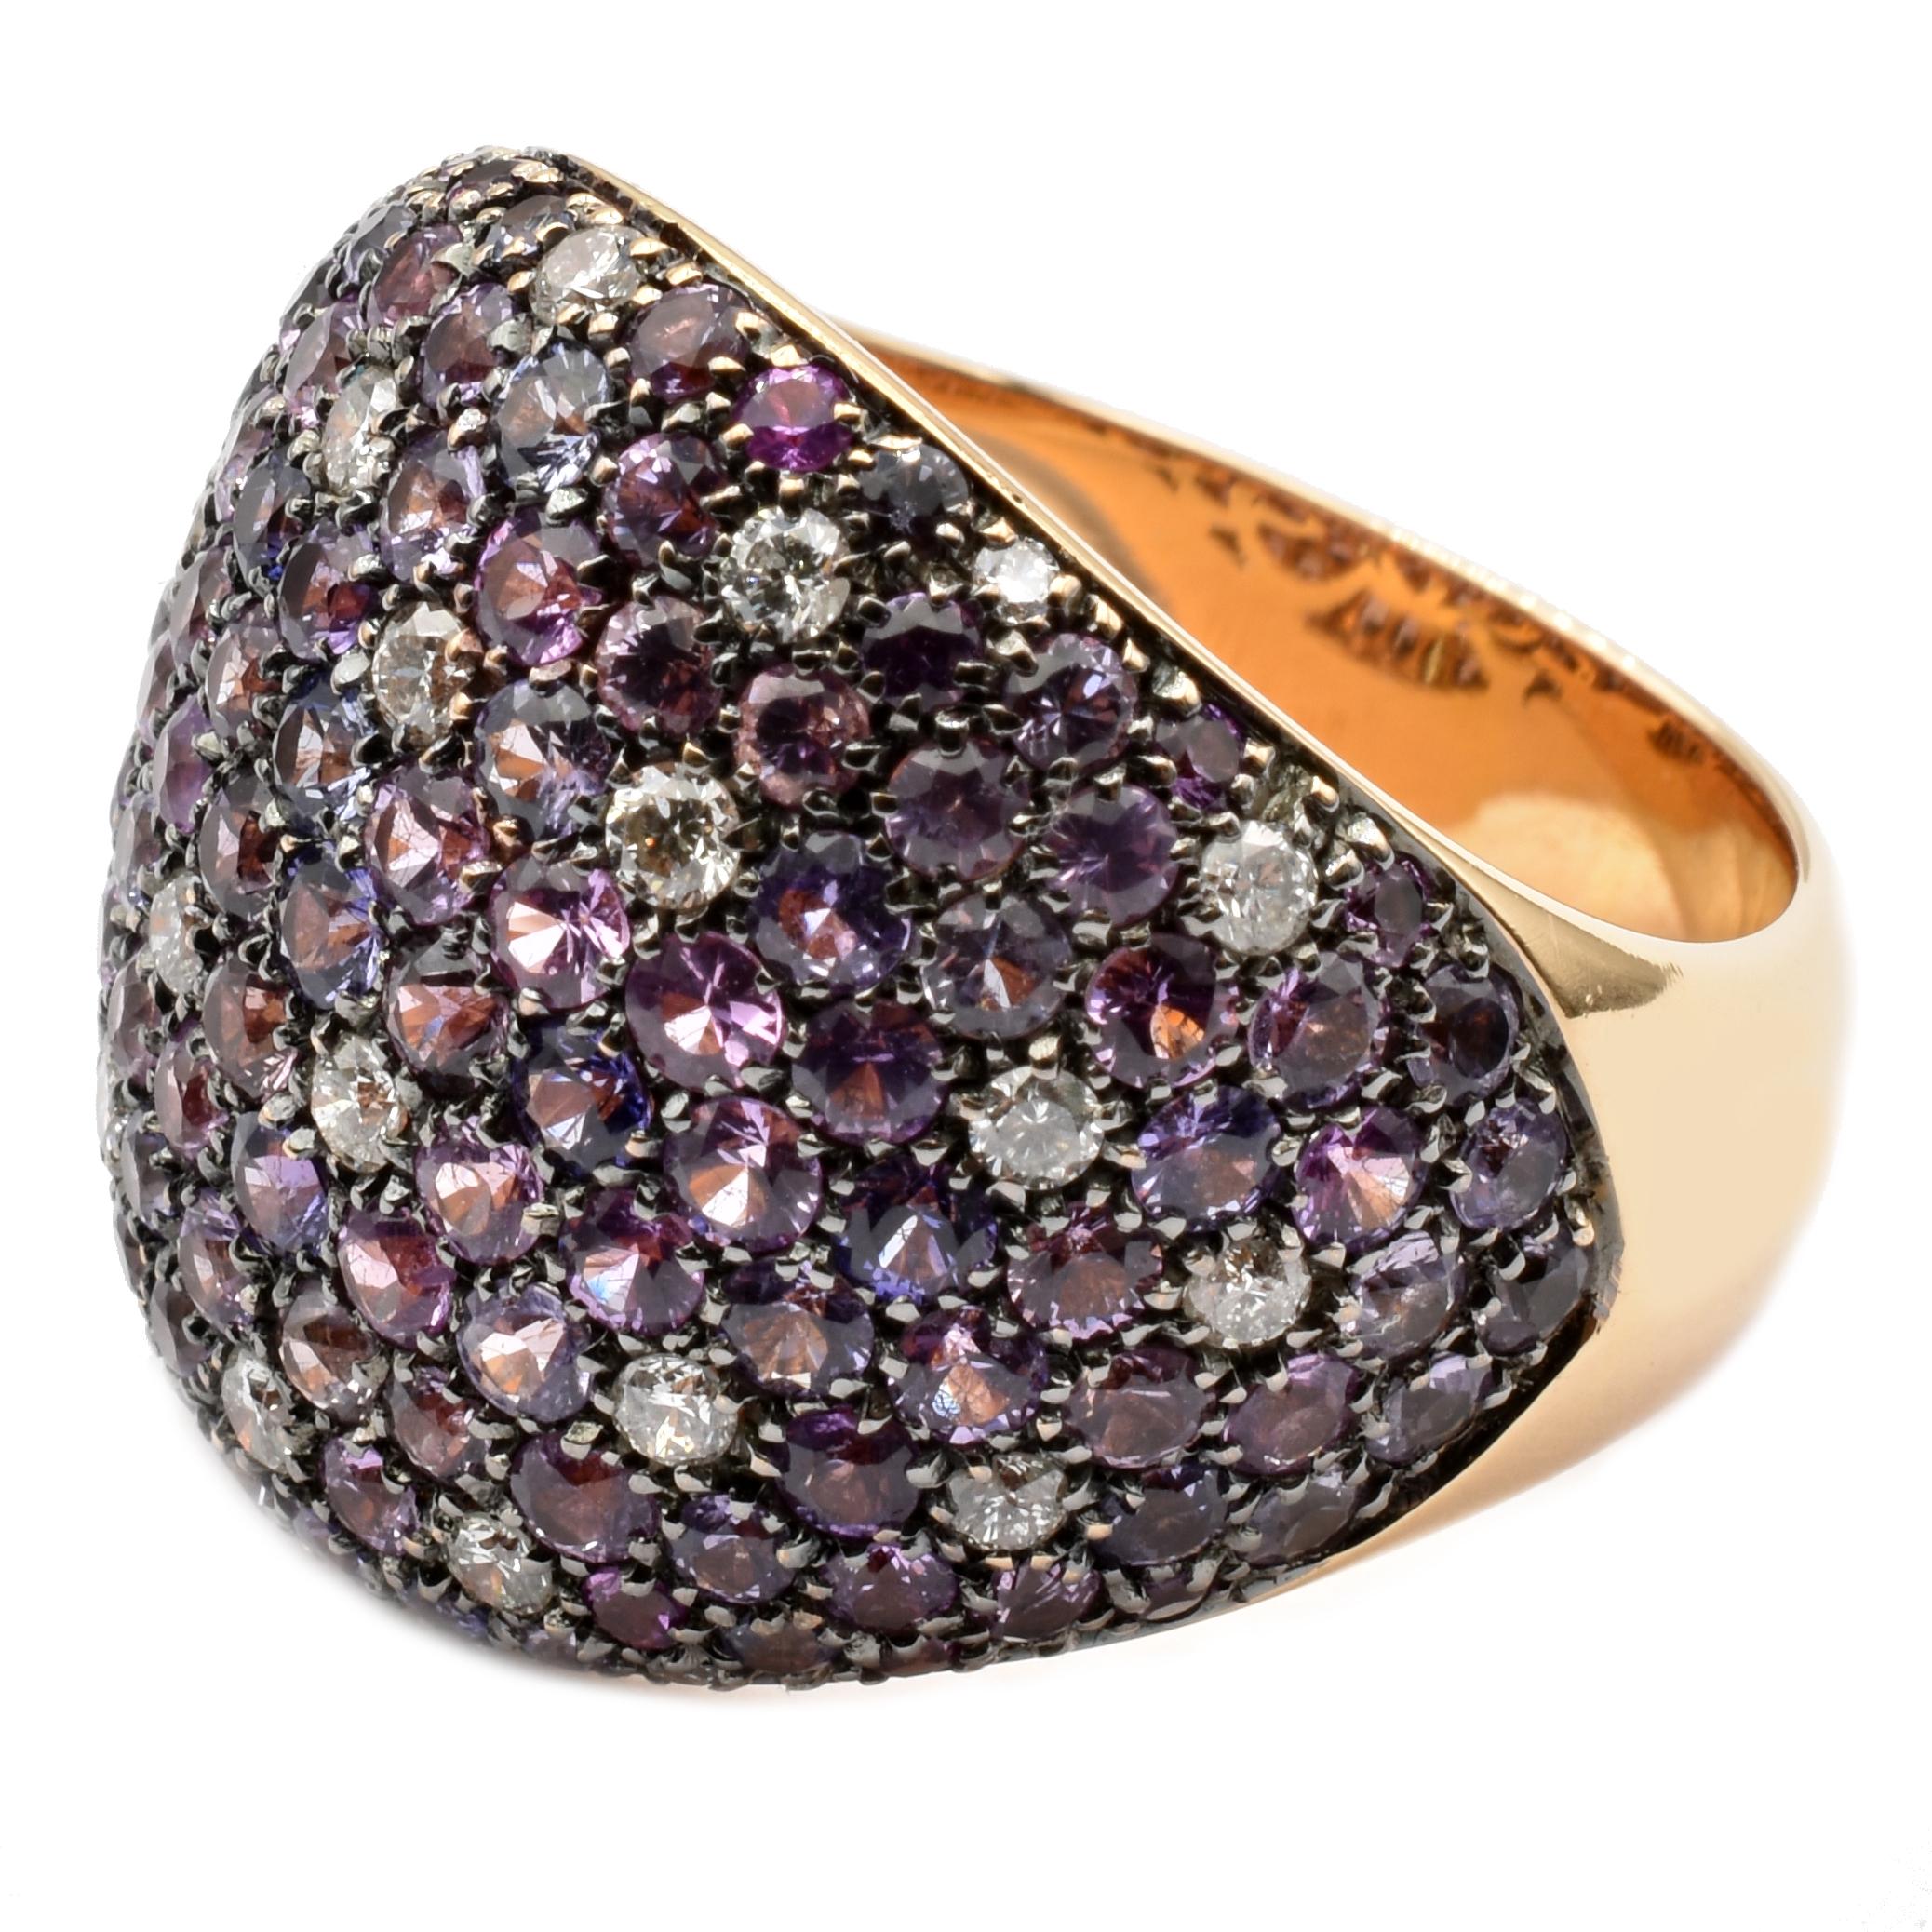 Gilberto Cassola 18Kt Rose Gold Ring with Multi Color Rainbow Sapphires  set on Black Rhodium Plated 18Kt Gold. Some White Diamonds spots on Sapphires Pavé .
Beautiful Hearts Inlays inside the ring.
Handmade in our Atelier in Valenza (AL).
18Kt Rose